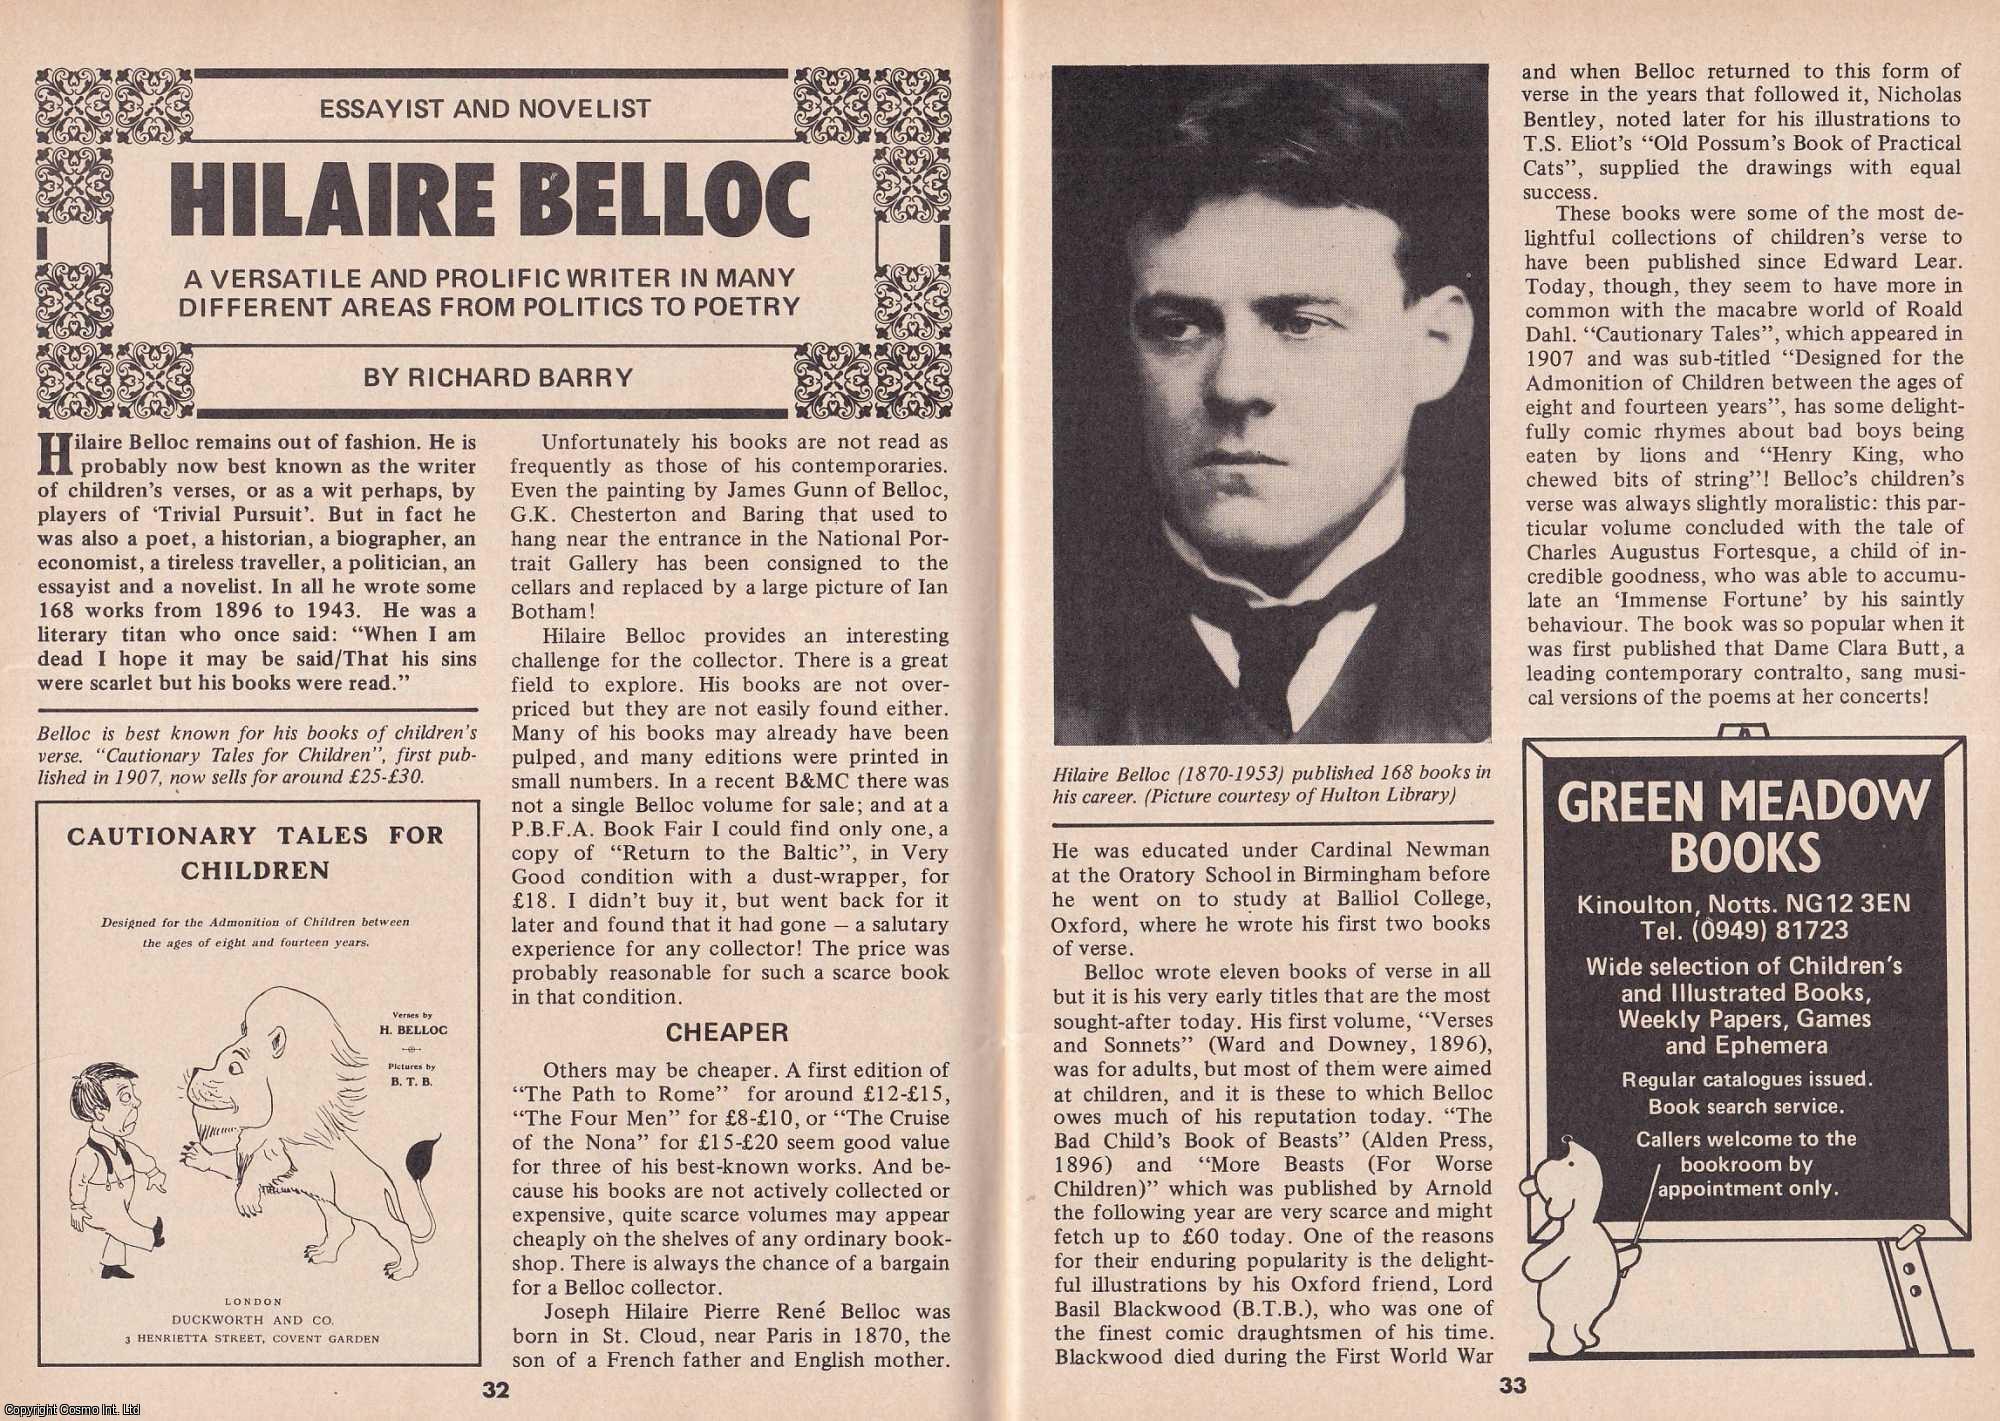 Richard Barry - Essayist and Novelist Hilaire Belloc. A Versatile and Prolific Writer. This is an original article separated from an issue of The Book & Magazine Collector publication.